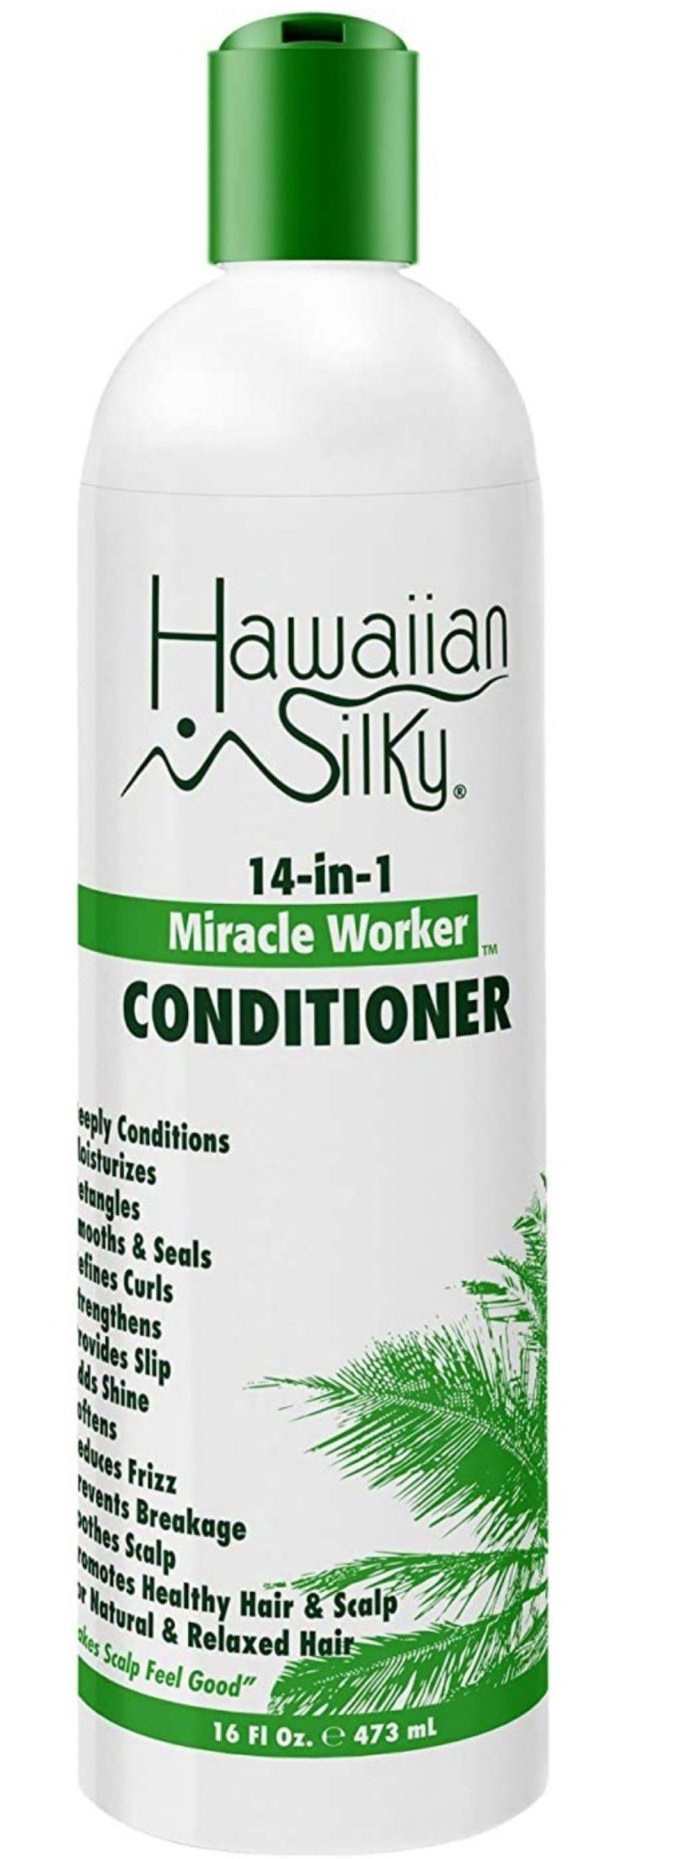 Hawaiian Silky Miracle Worker Conditioner 14-in-1